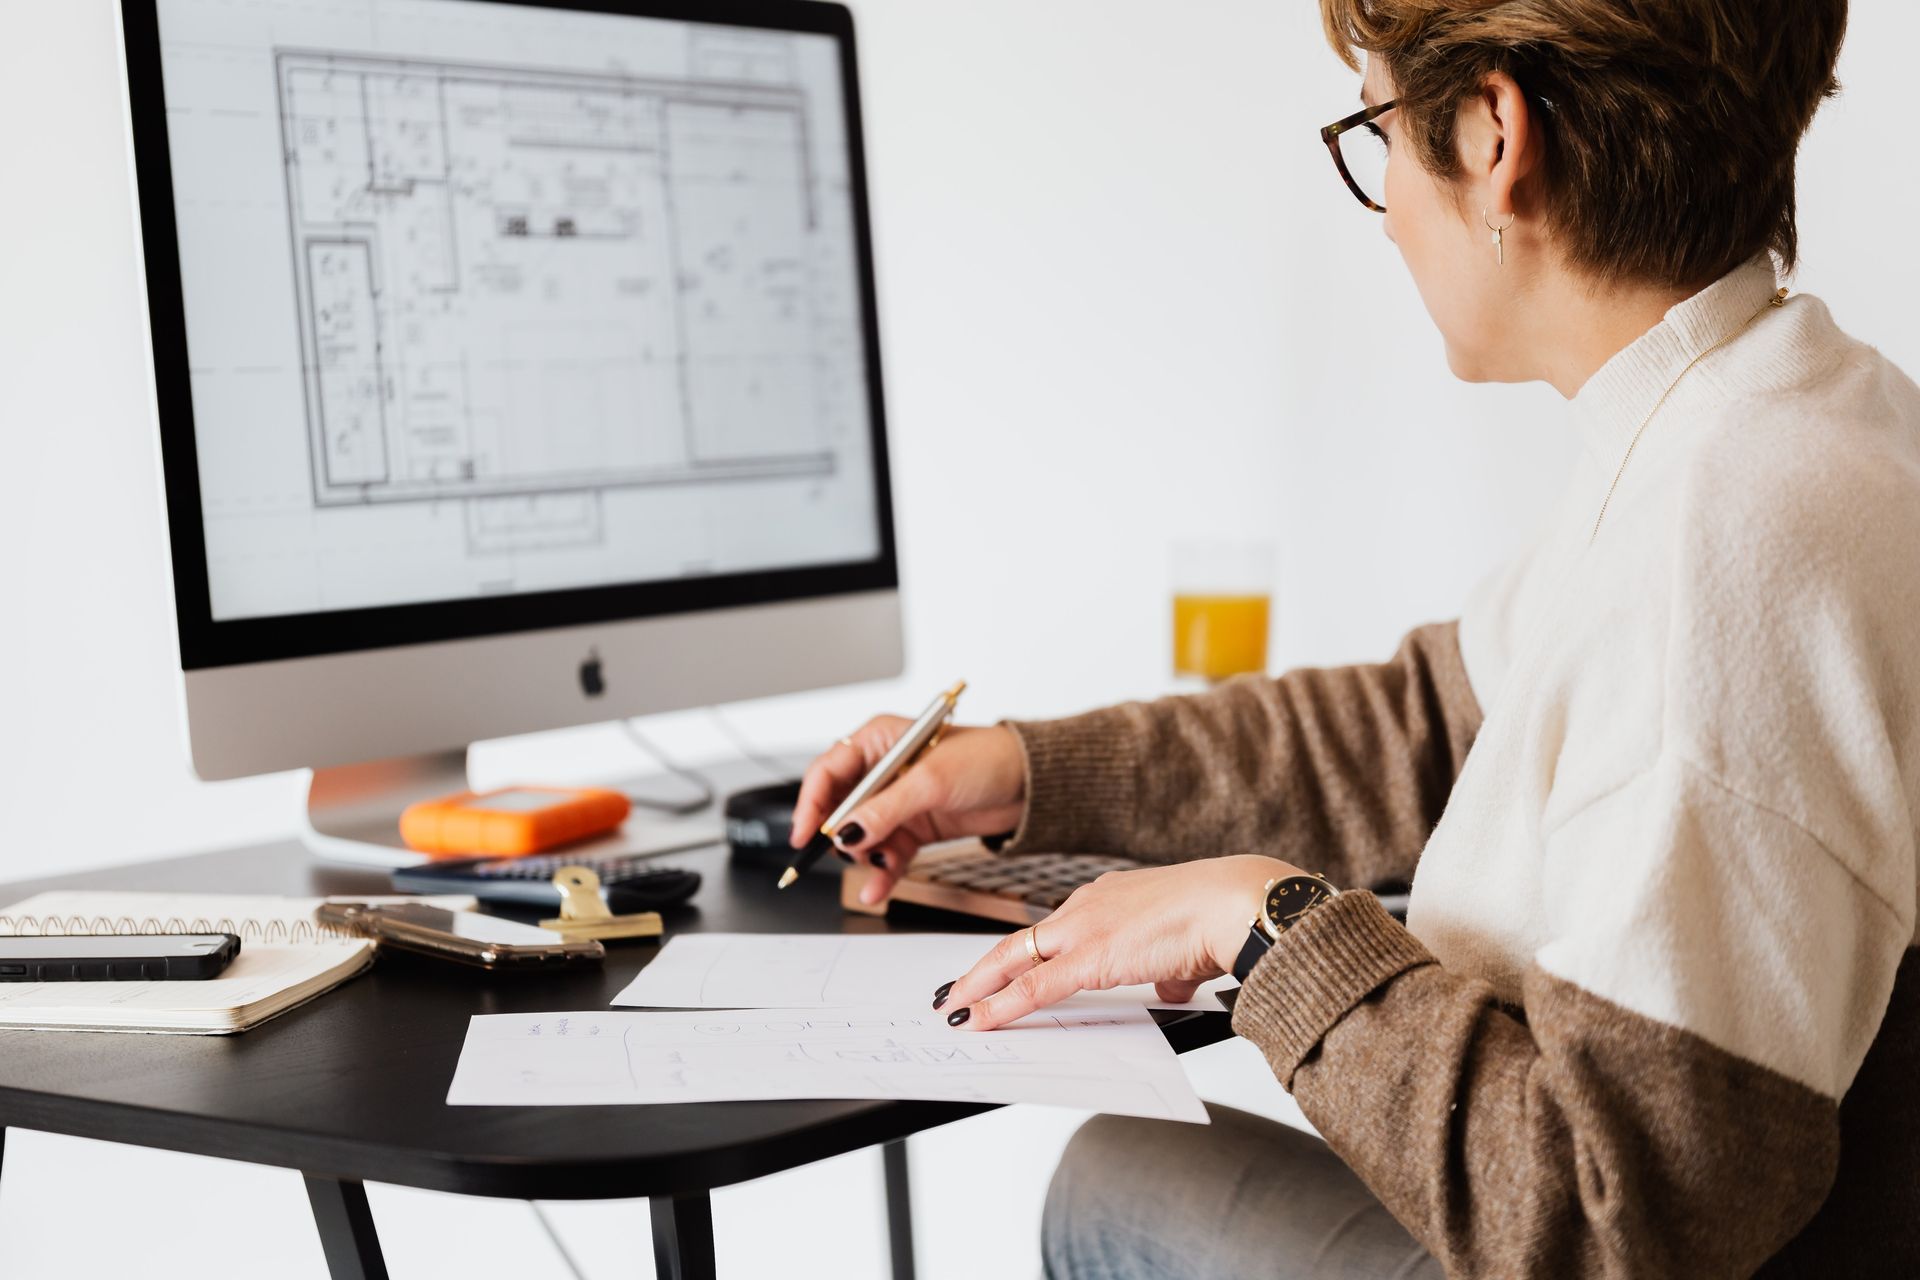 Person in white and brown sweater writes on paper while looking at a blueprint on their monitor.